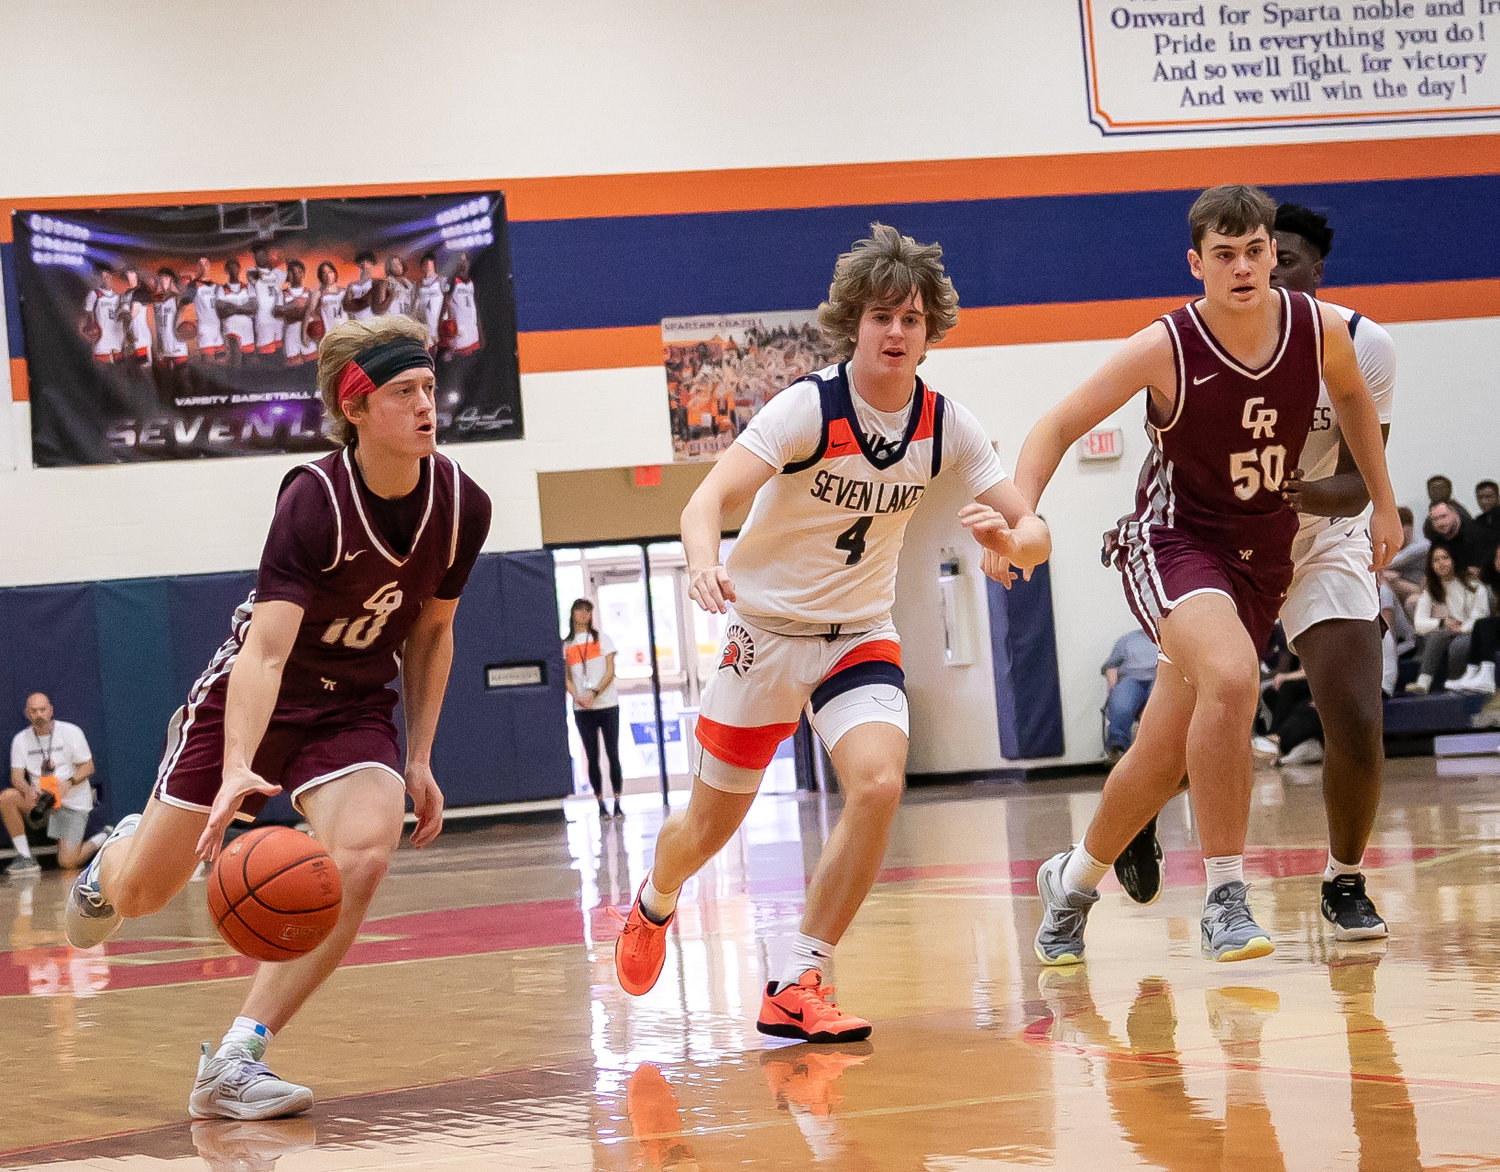 Derek Kollmansberger dribbles up the court during Saturday's game between Seven Lakes and Cinco Ranch at the Seven Lakes gym.